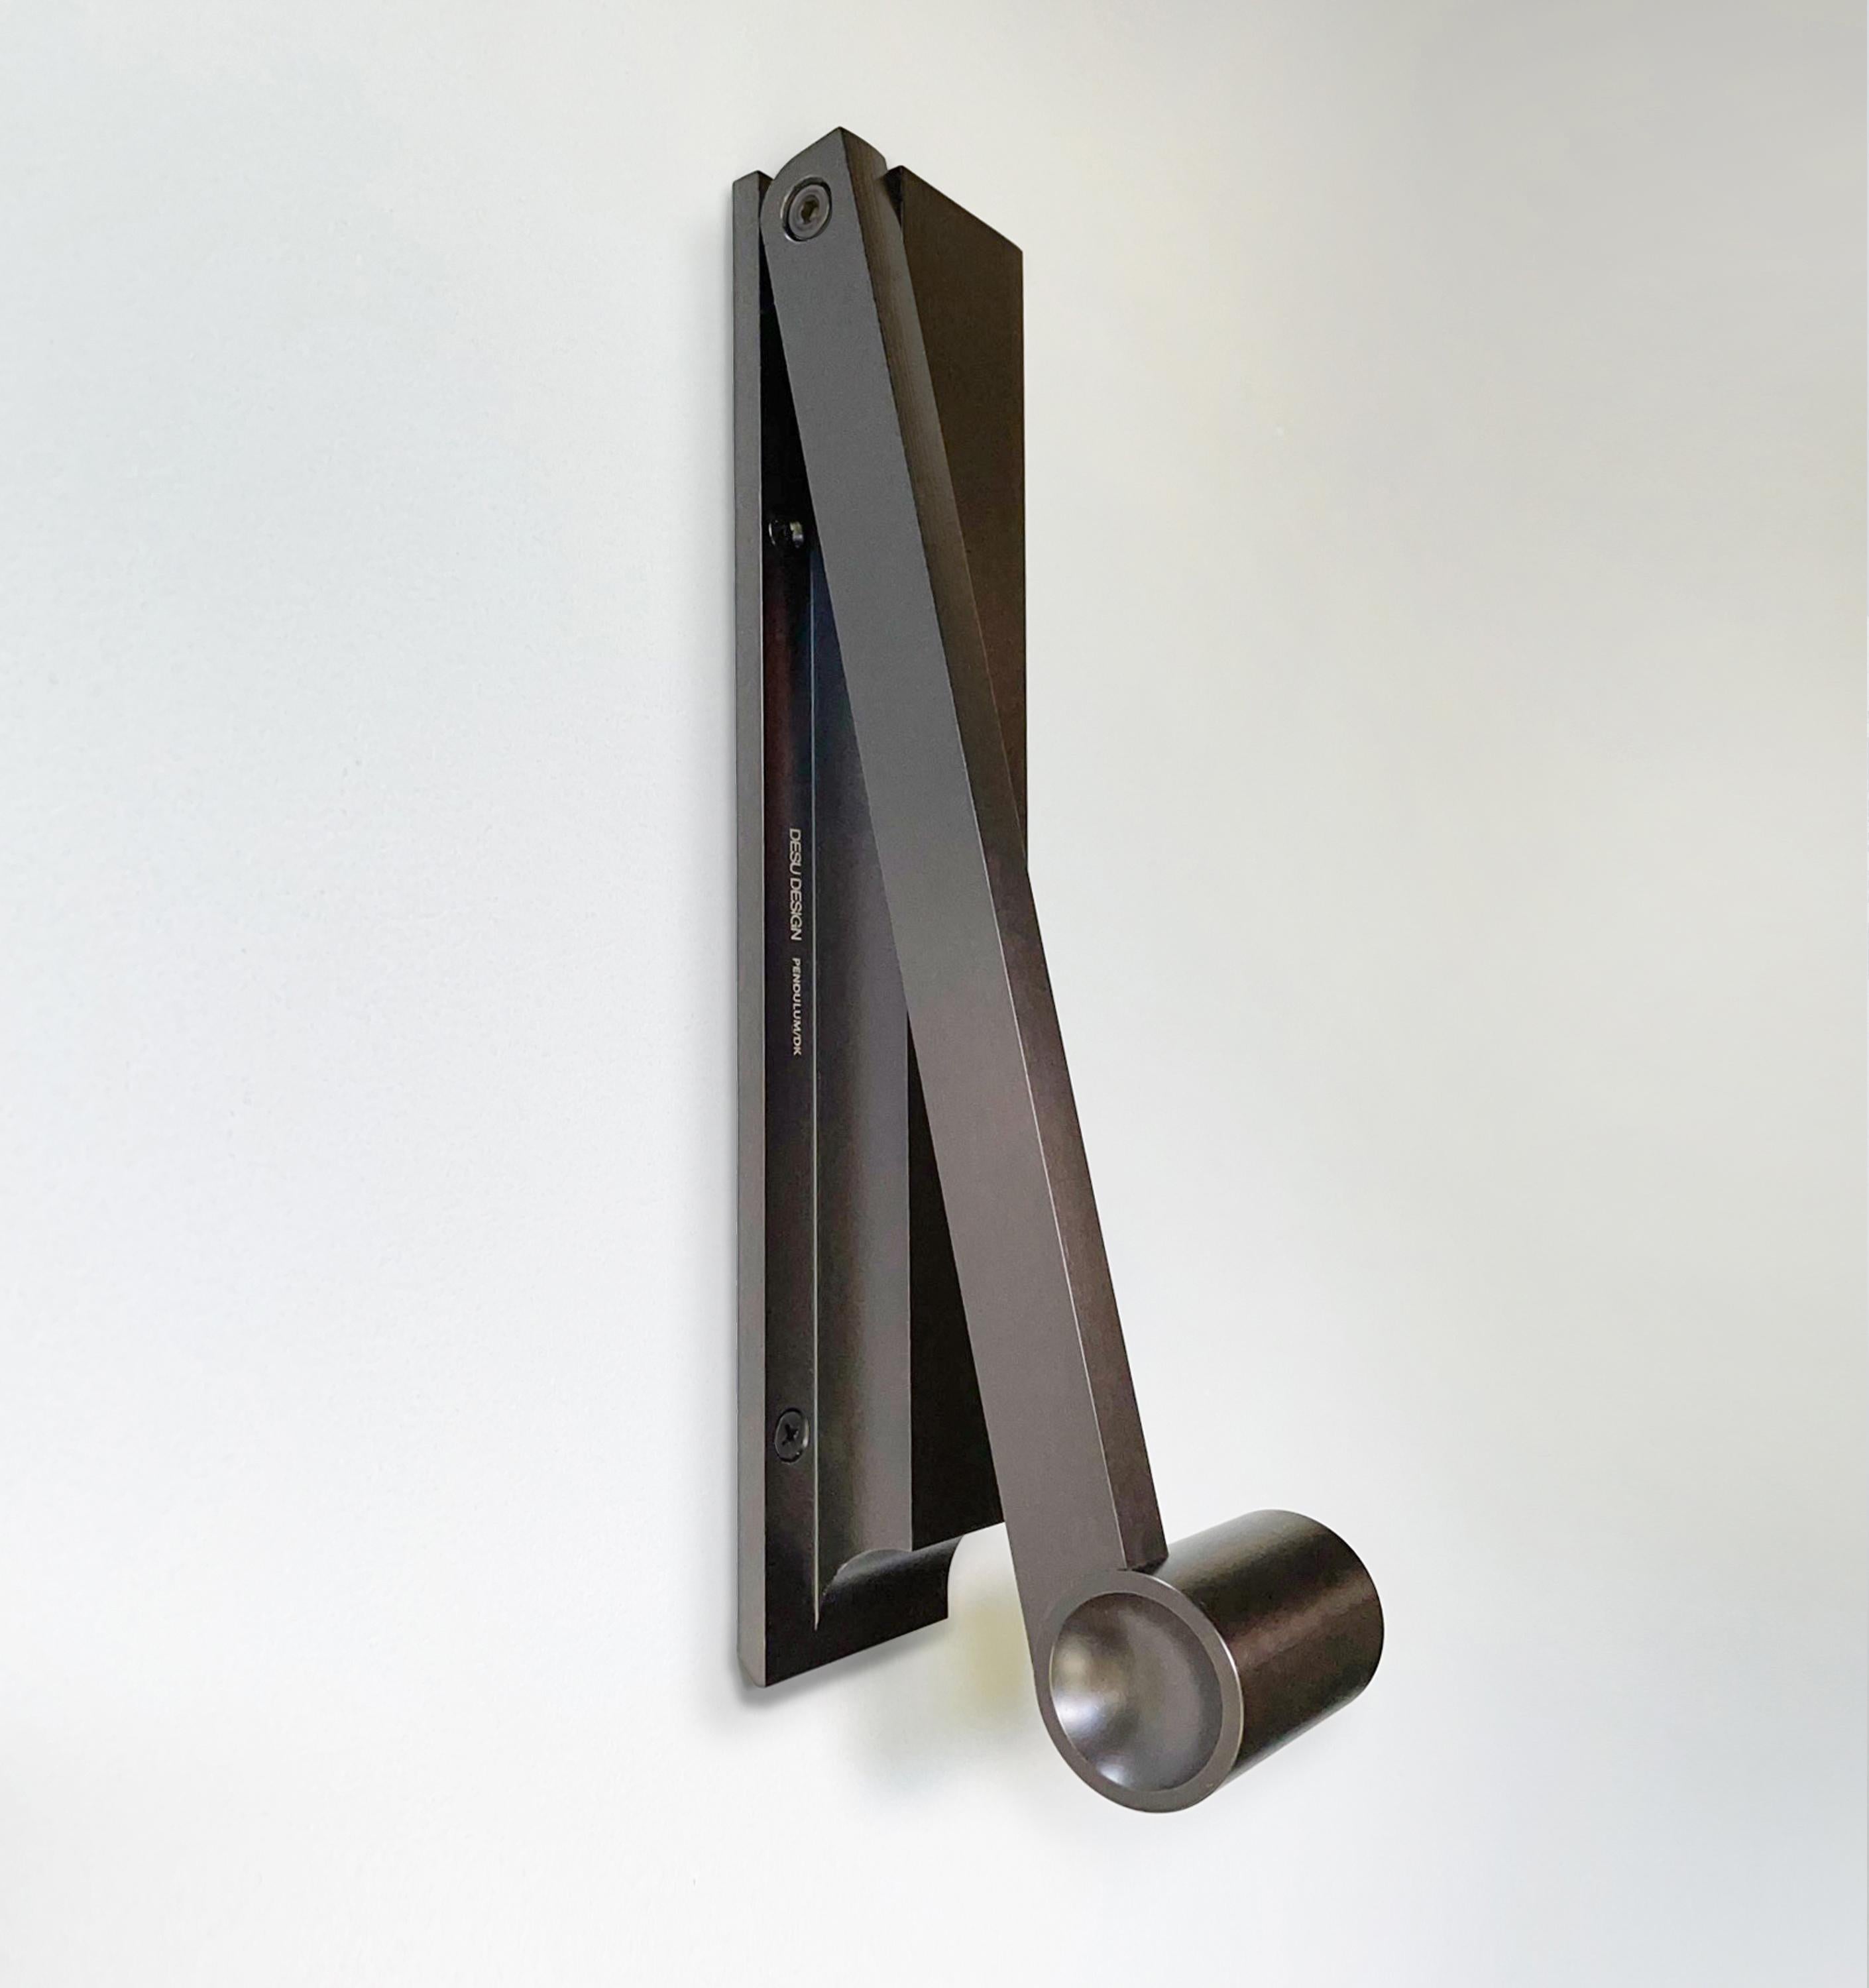 The sculptural Pendulum door knocker brings old world craftsmanship and unadorned utility together to create minimalist art. The hefty weight of the handle feels good in your hand, and has slightly recessed sides to intuitively grasp. Designed by